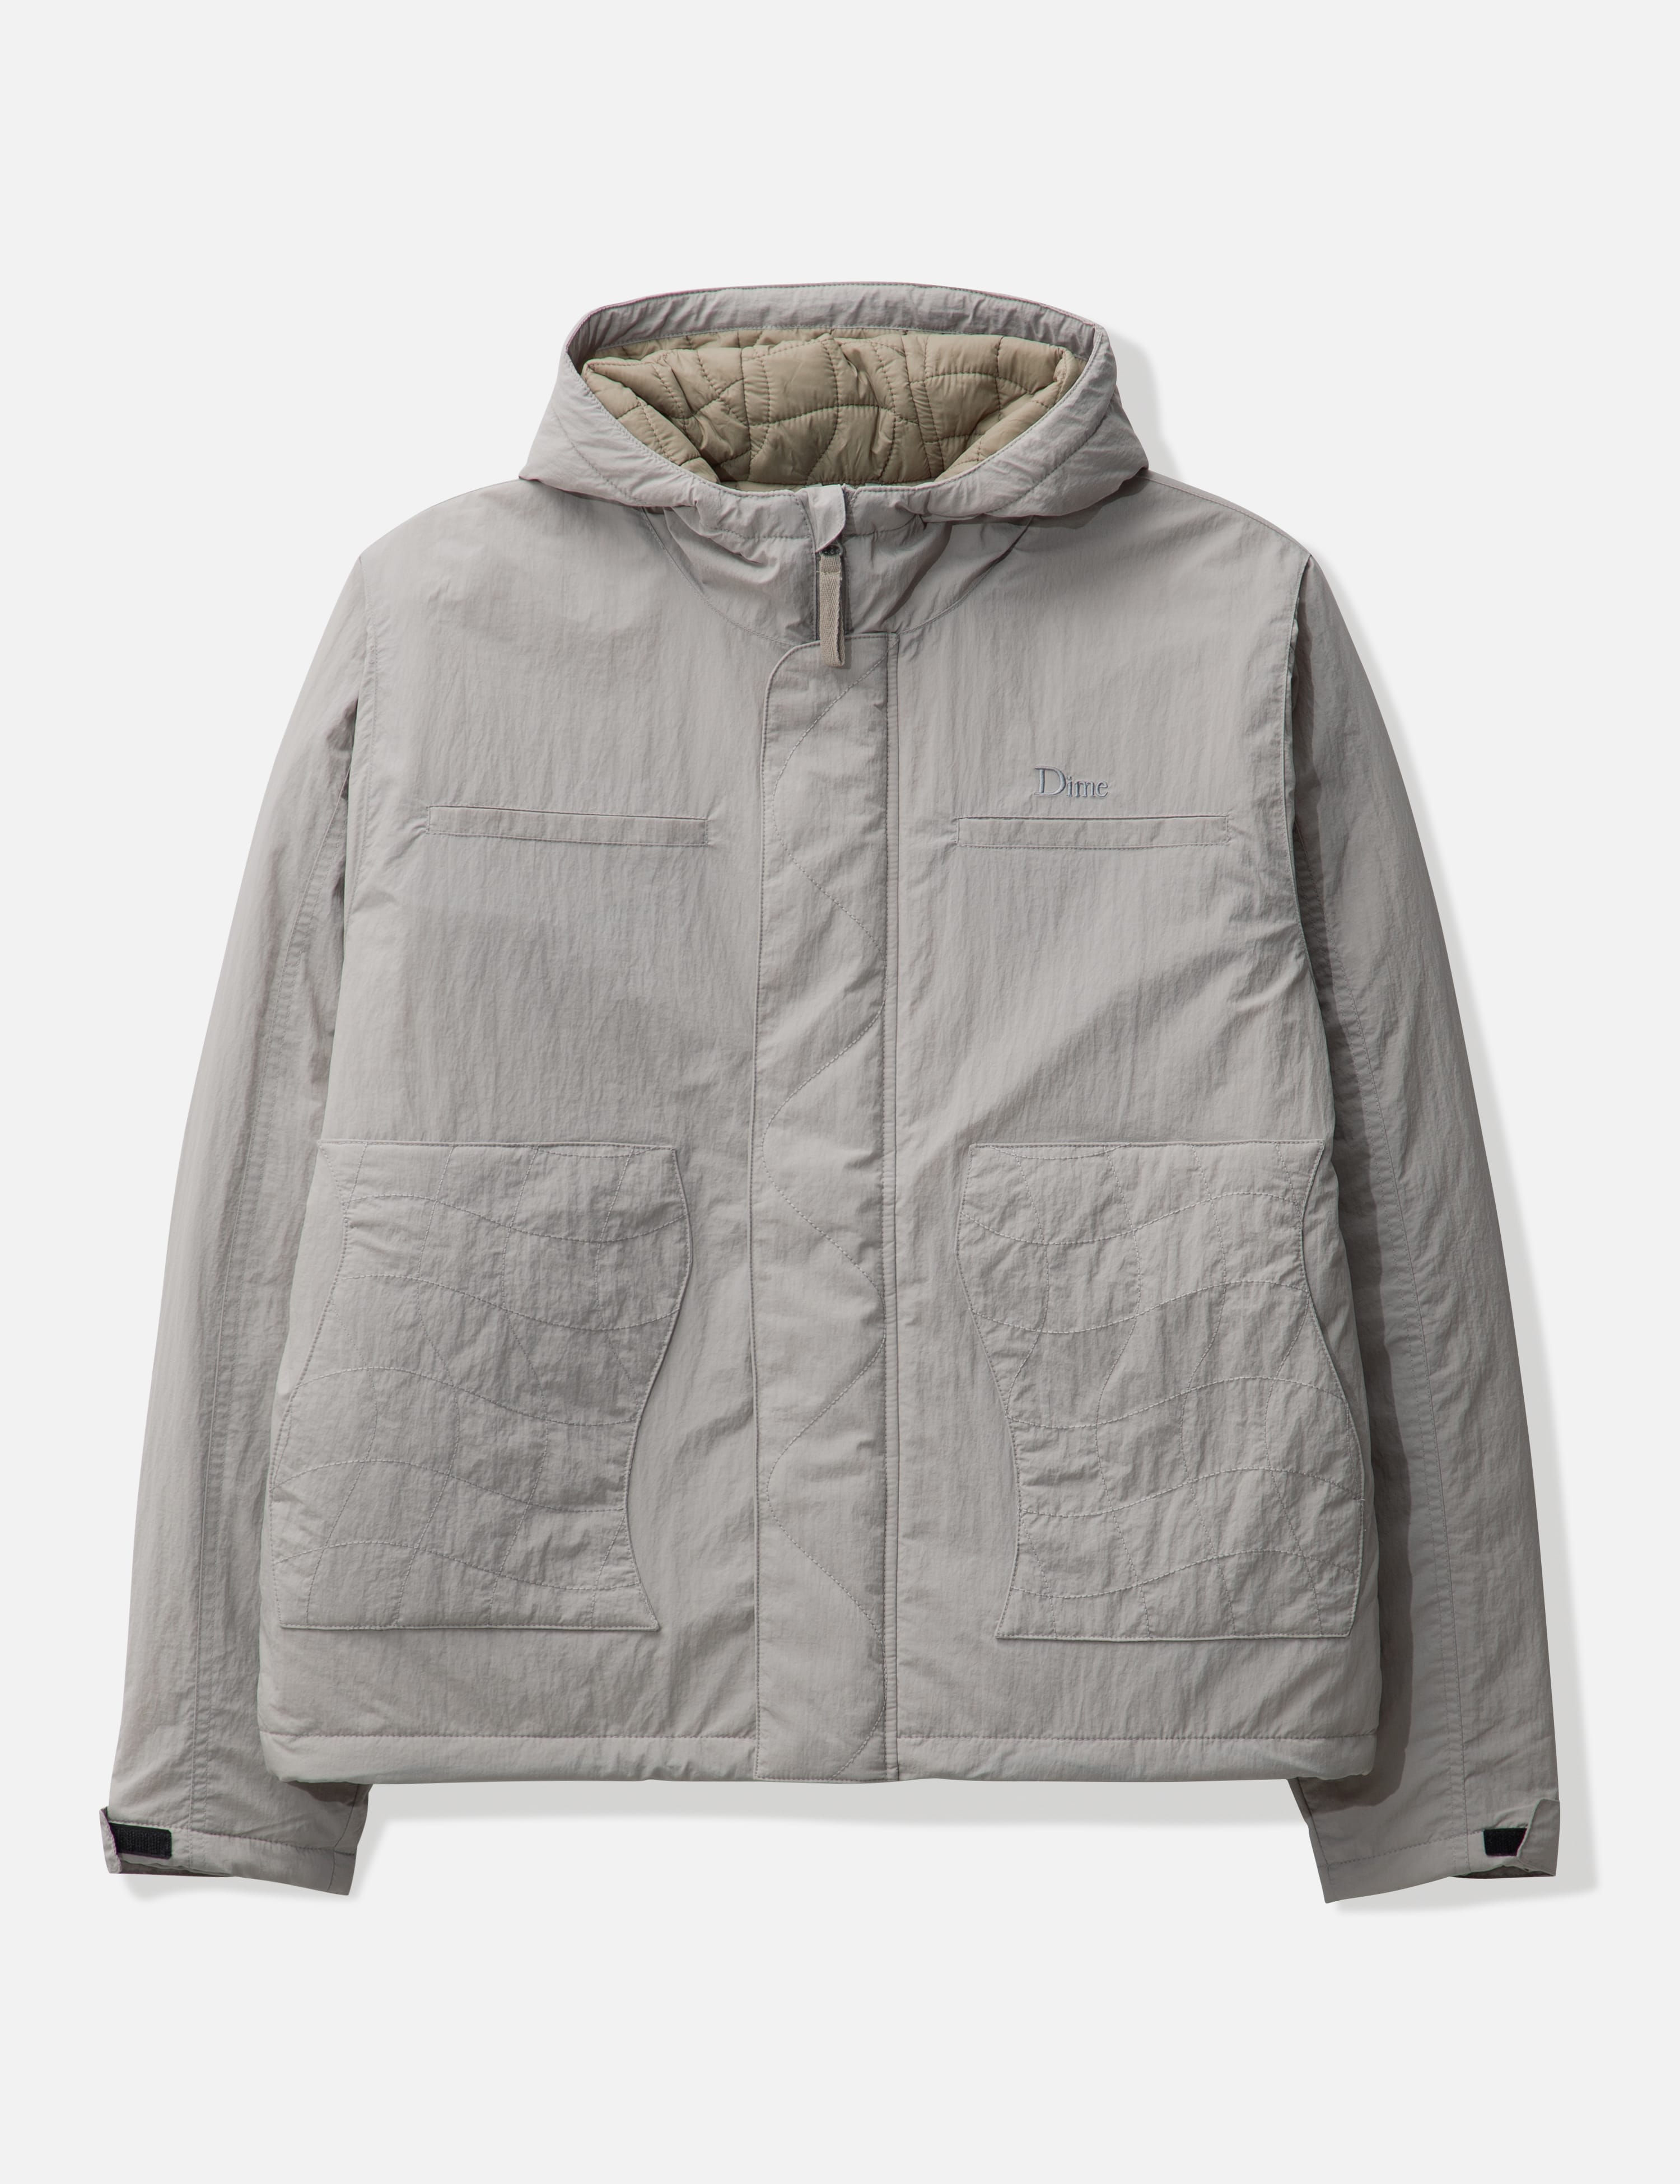 Dime - PLEIN-AIR JACKET | HBX - Globally Curated Fashion and